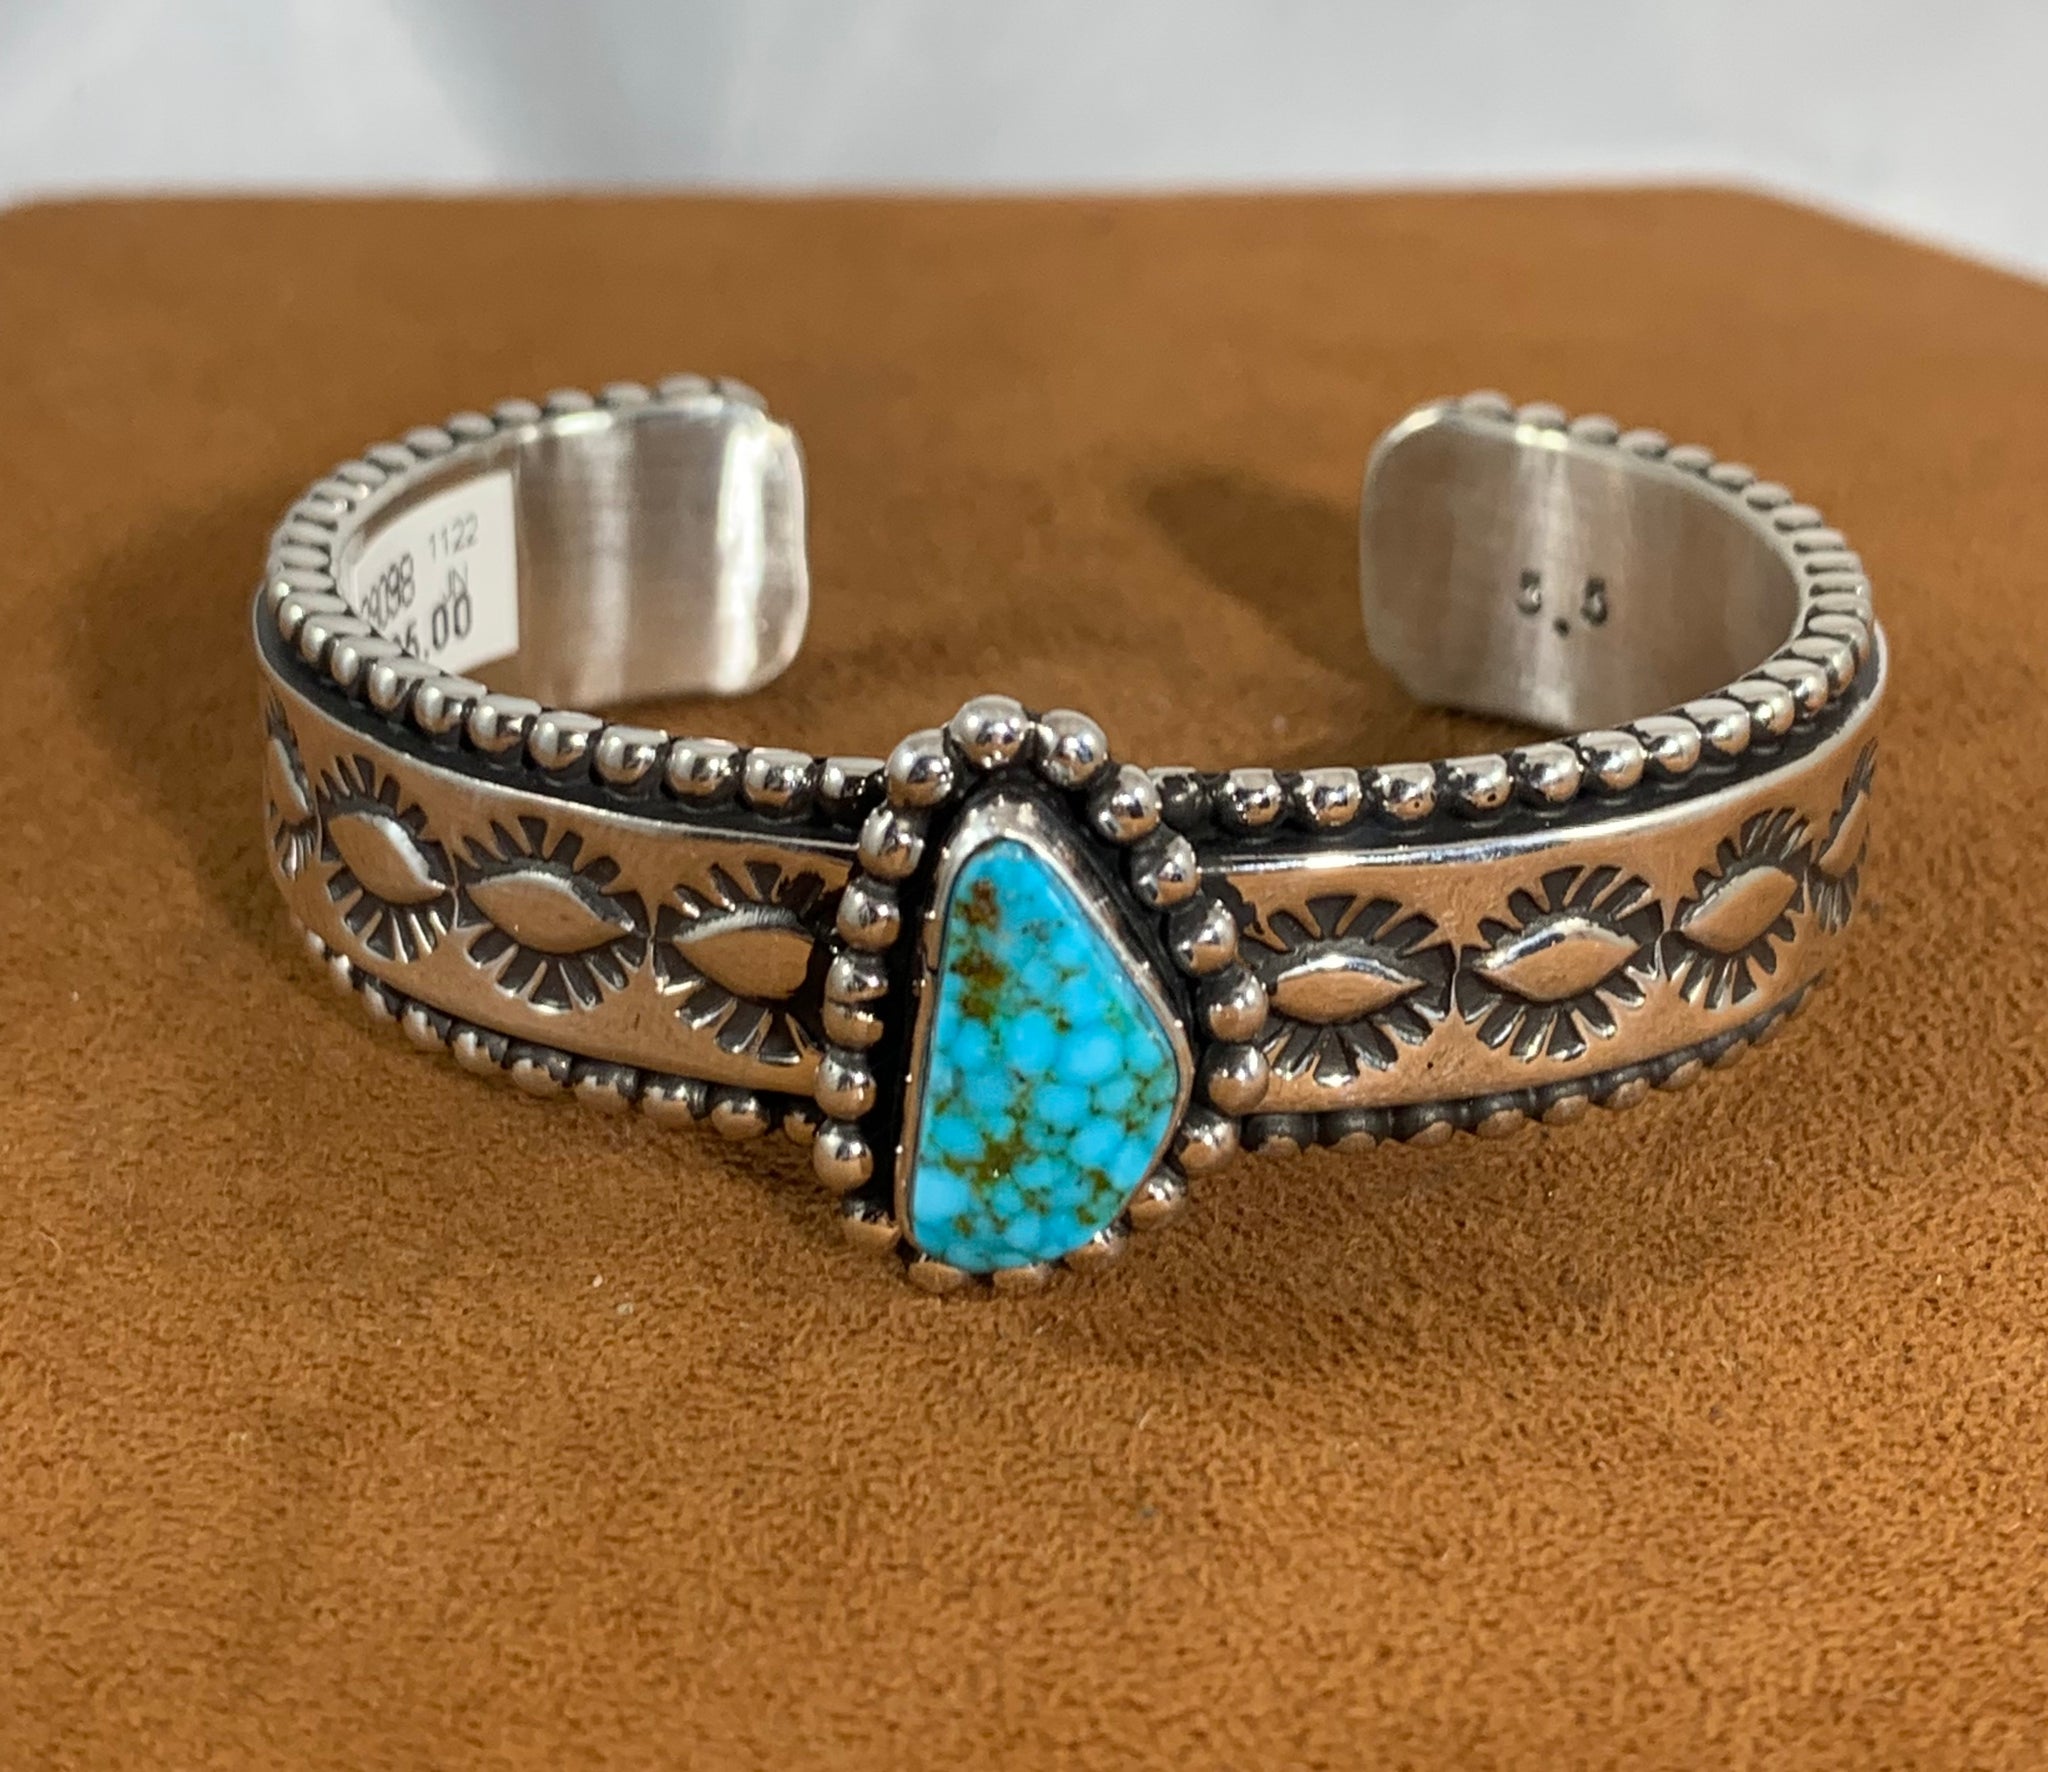 Stamped Turquoise Cuff by Johnathan Nez